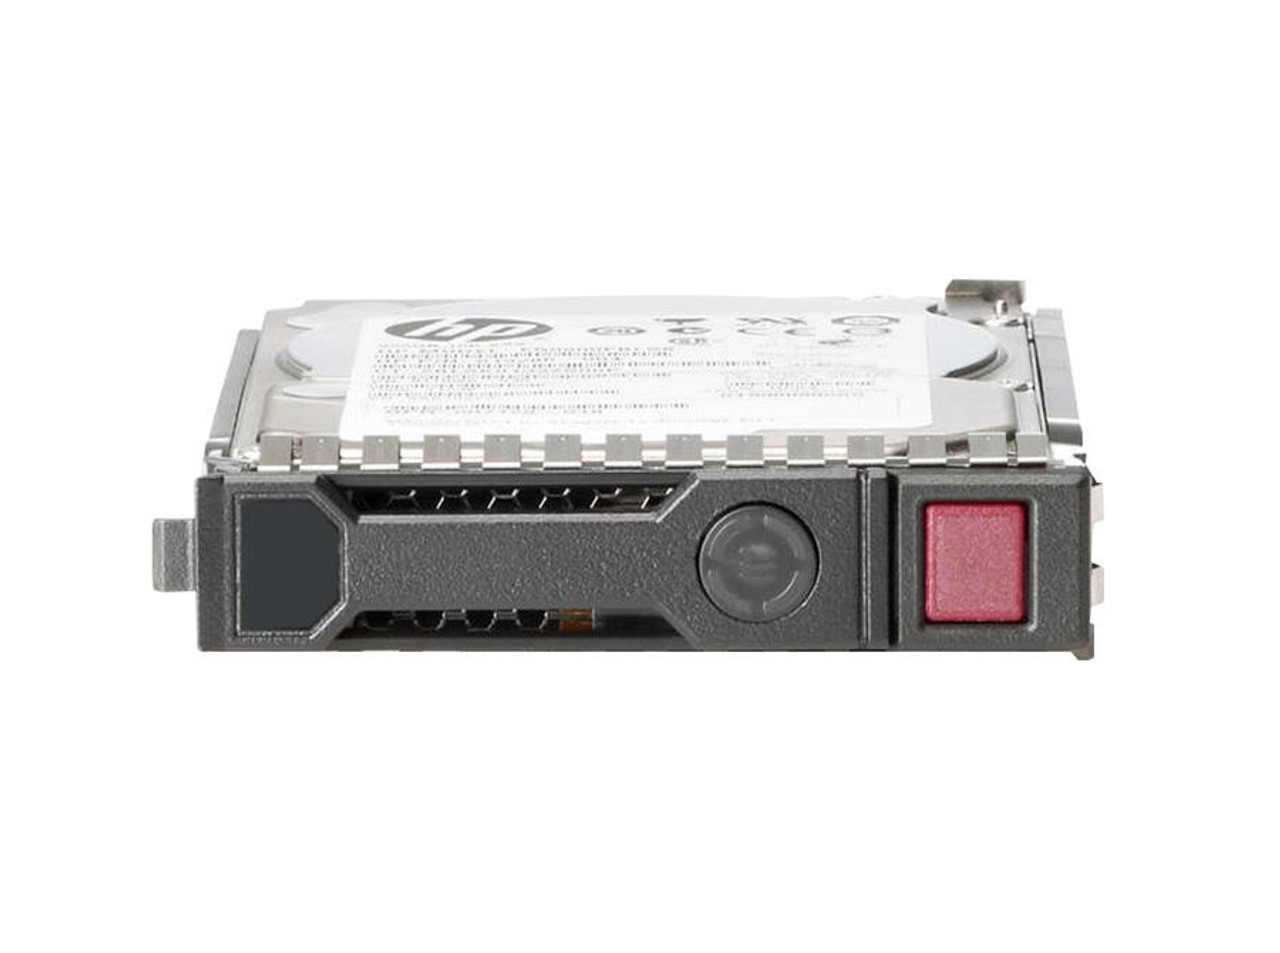 832514-S21 HPE 1TB 7200RPM SAS 12Gbps Midline 2.5-inch Internal Hard Drive with Smart Carrier